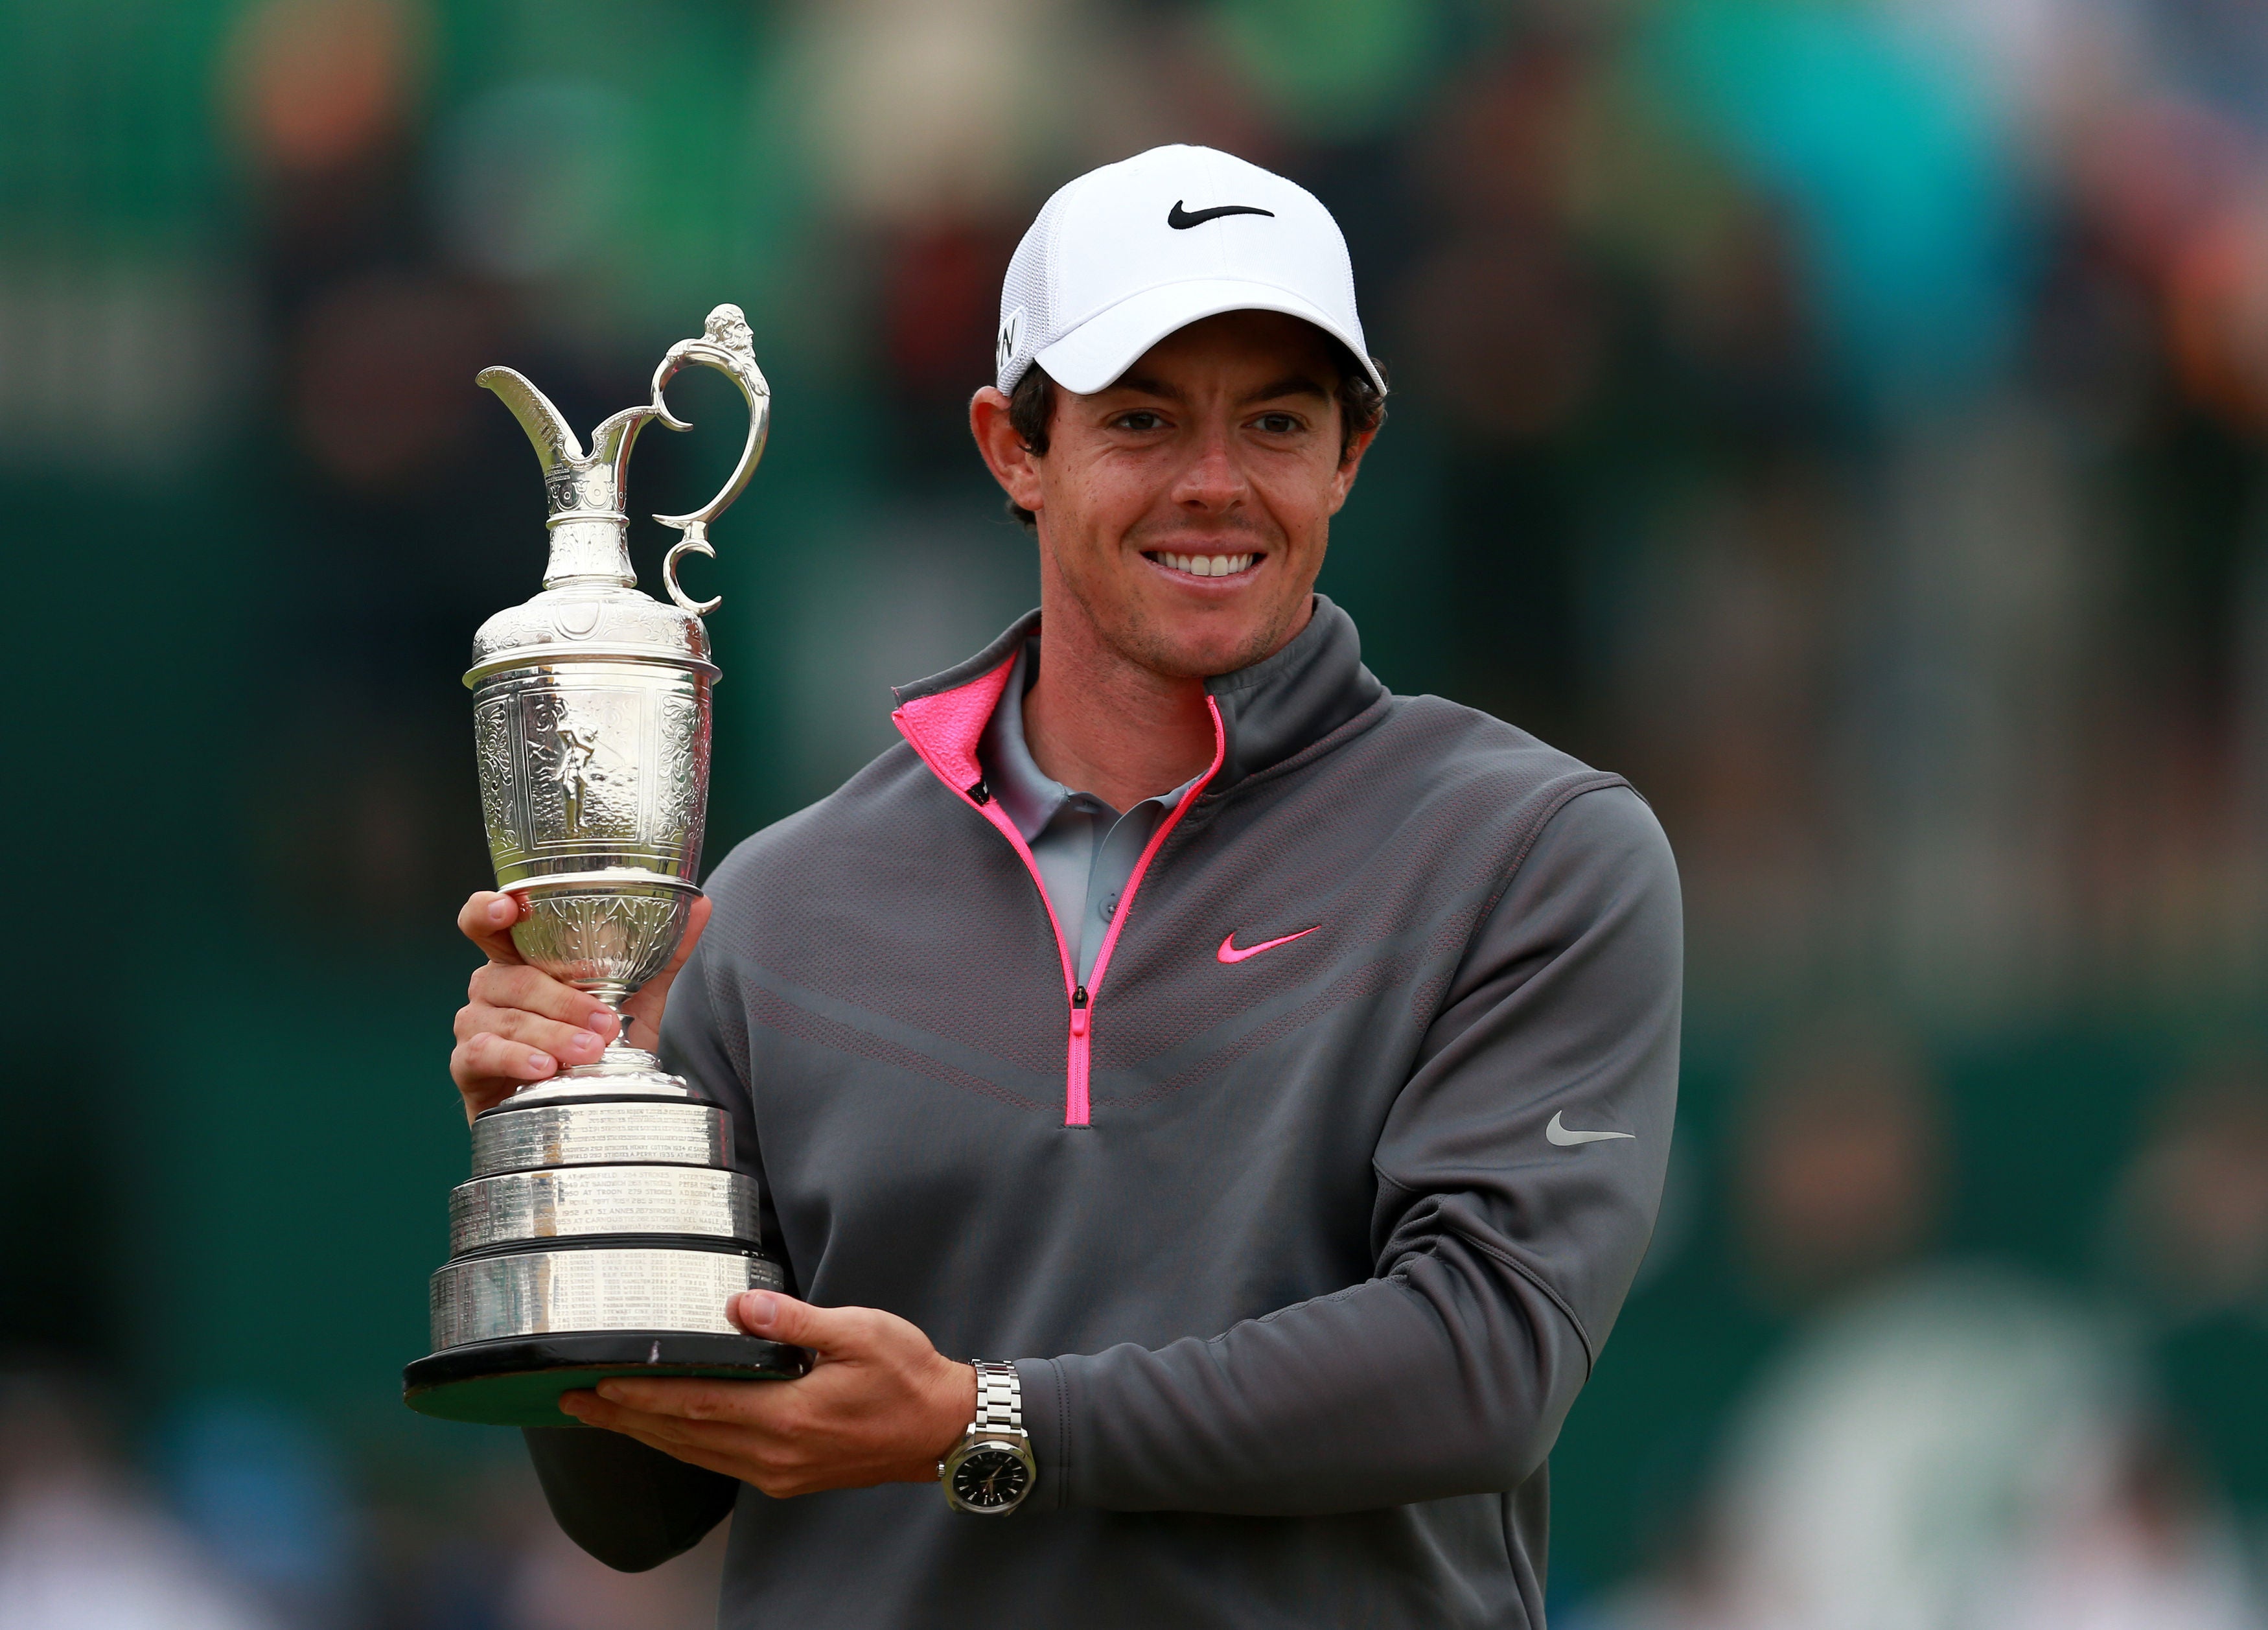 Rory McIlroy celebrates with the Claret Jug after winning the 2014 Open Championship (David Davies/PA)